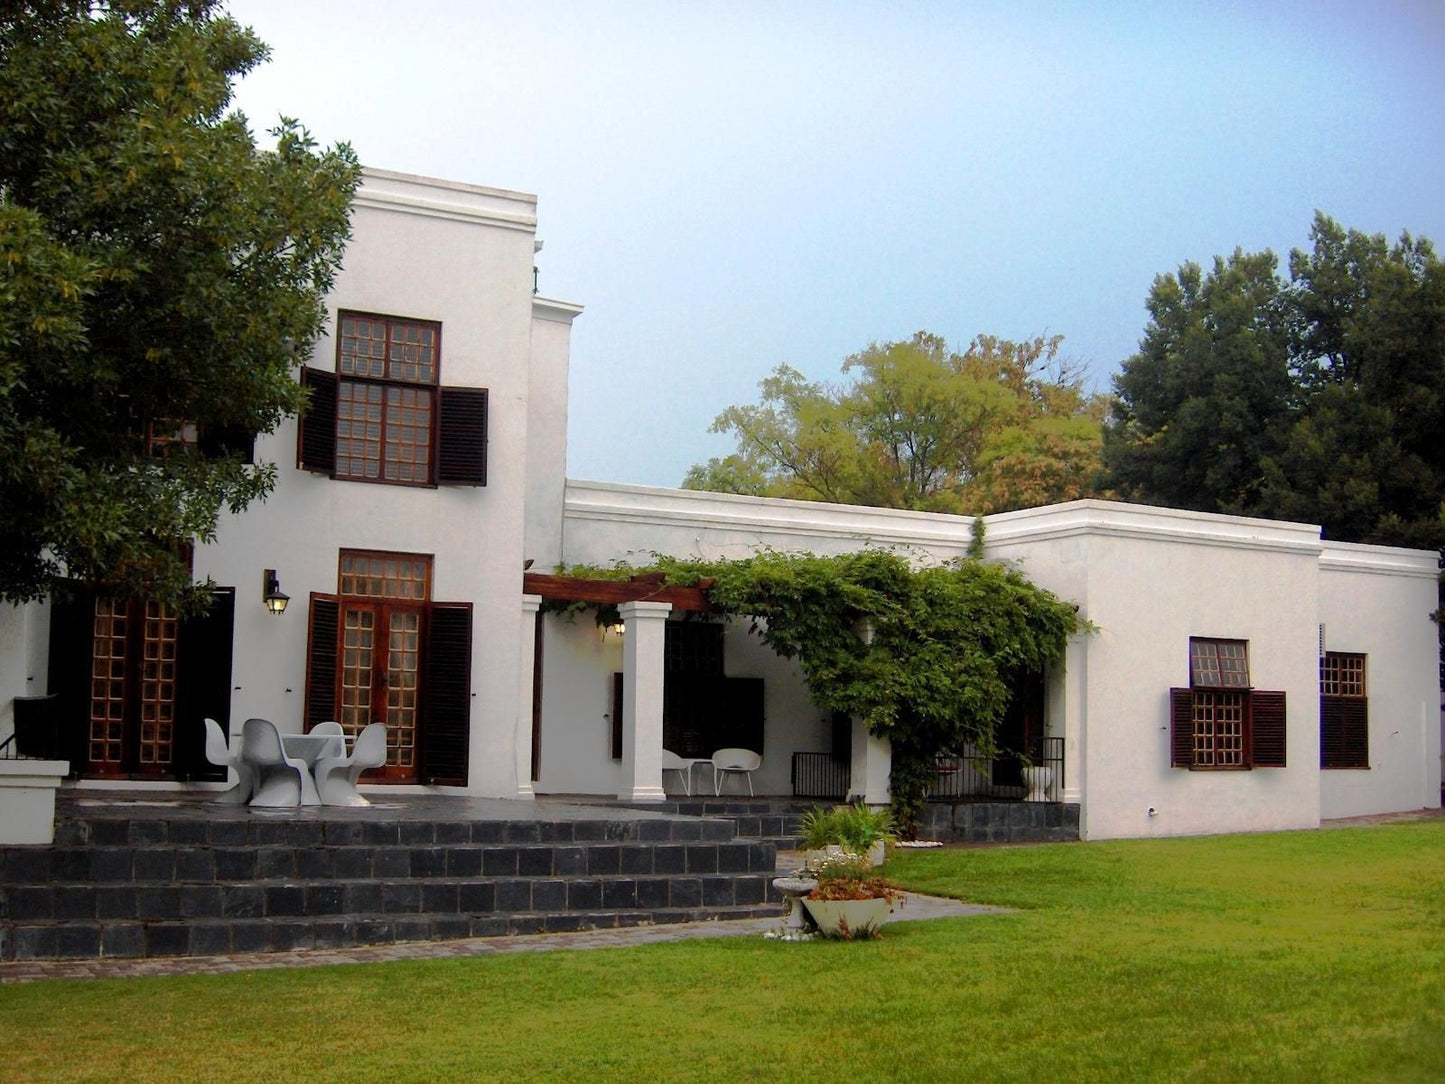 96 On Bree Guesthouse Heilbron Free State South Africa House, Building, Architecture